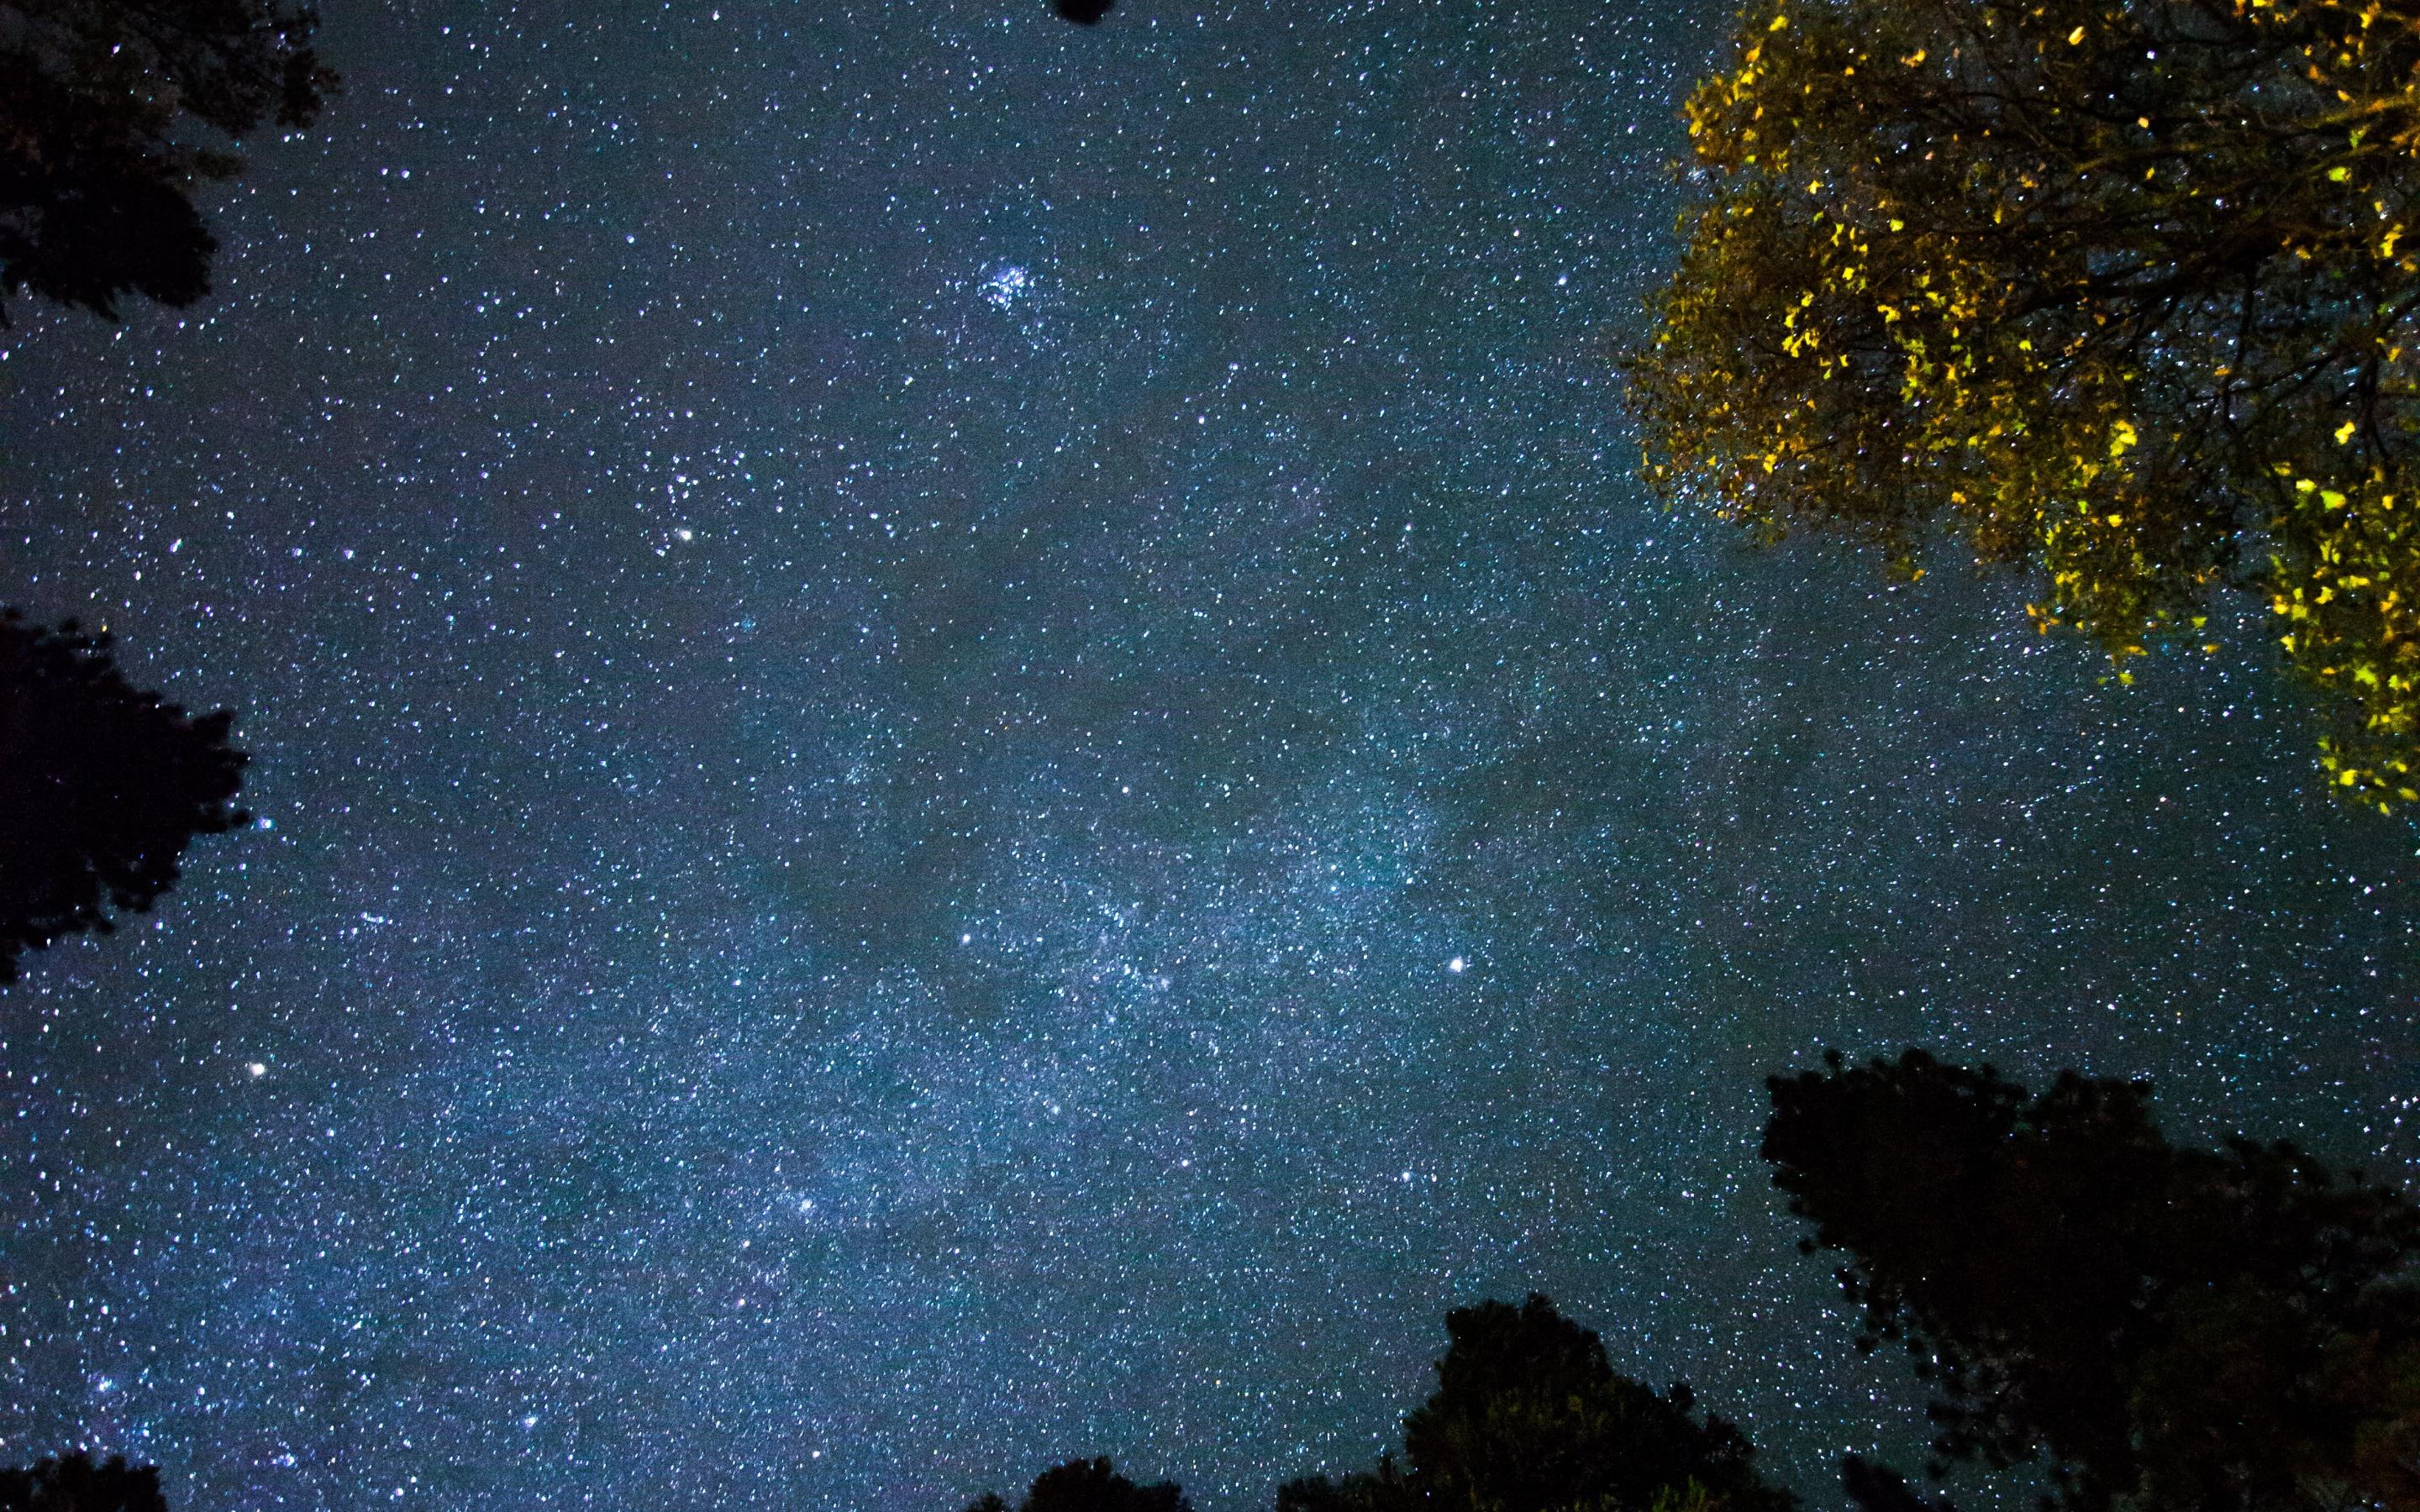 A photo of the sky taken at night